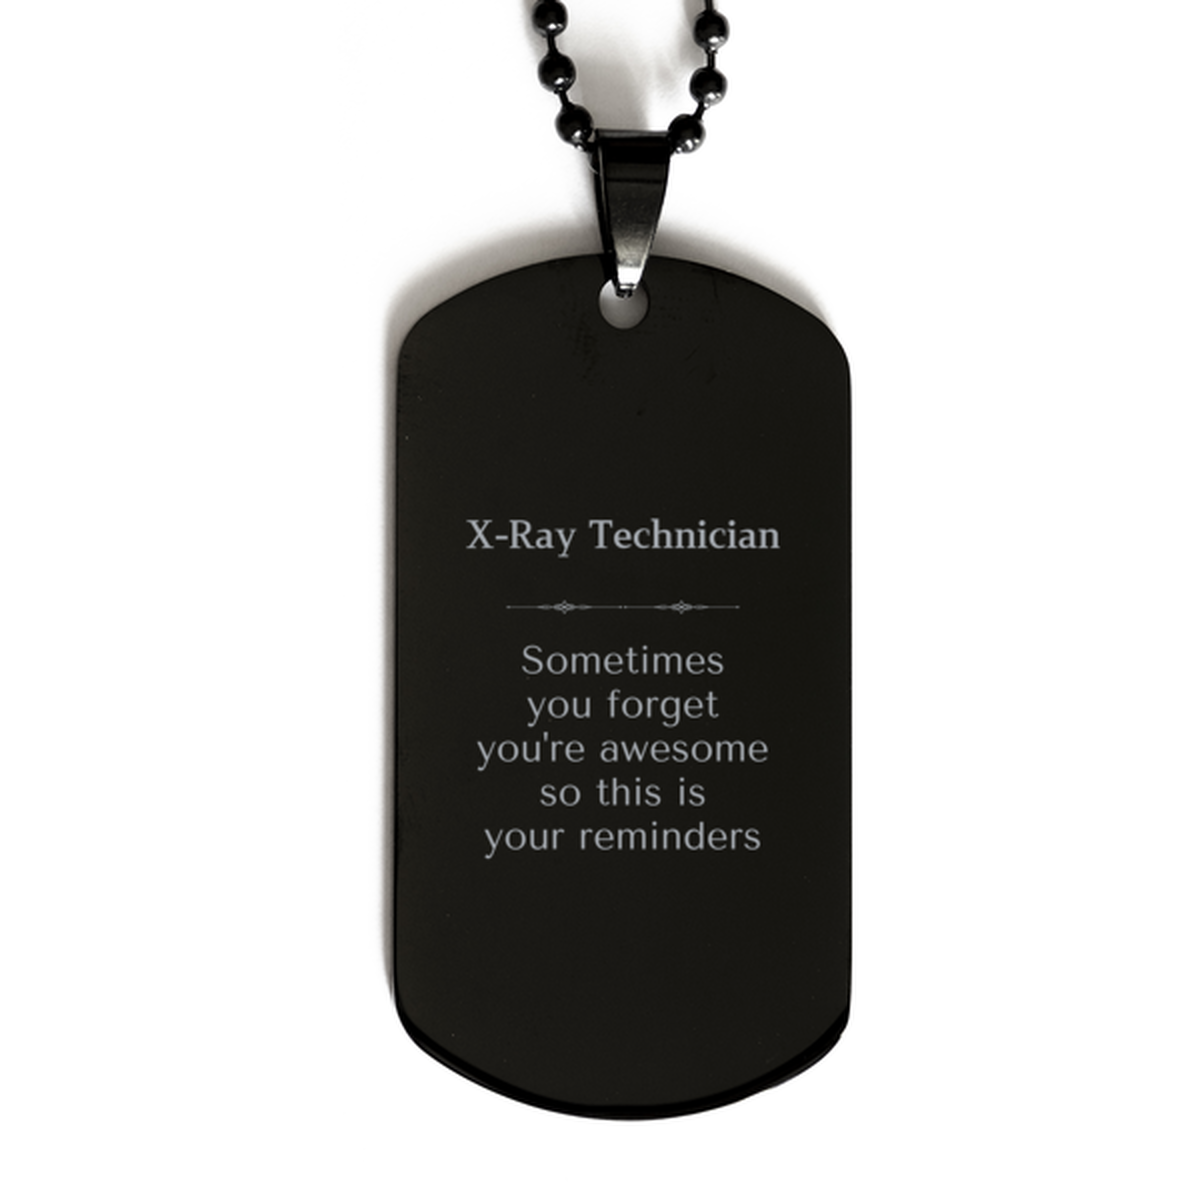 Sentimental X-Ray Technician Black Dog Tag, X-Ray Technician Sometimes you forget you're awesome so this is your reminders, Graduation Christmas Birthday Gifts for X-Ray Technician, Men, Women, Coworkers